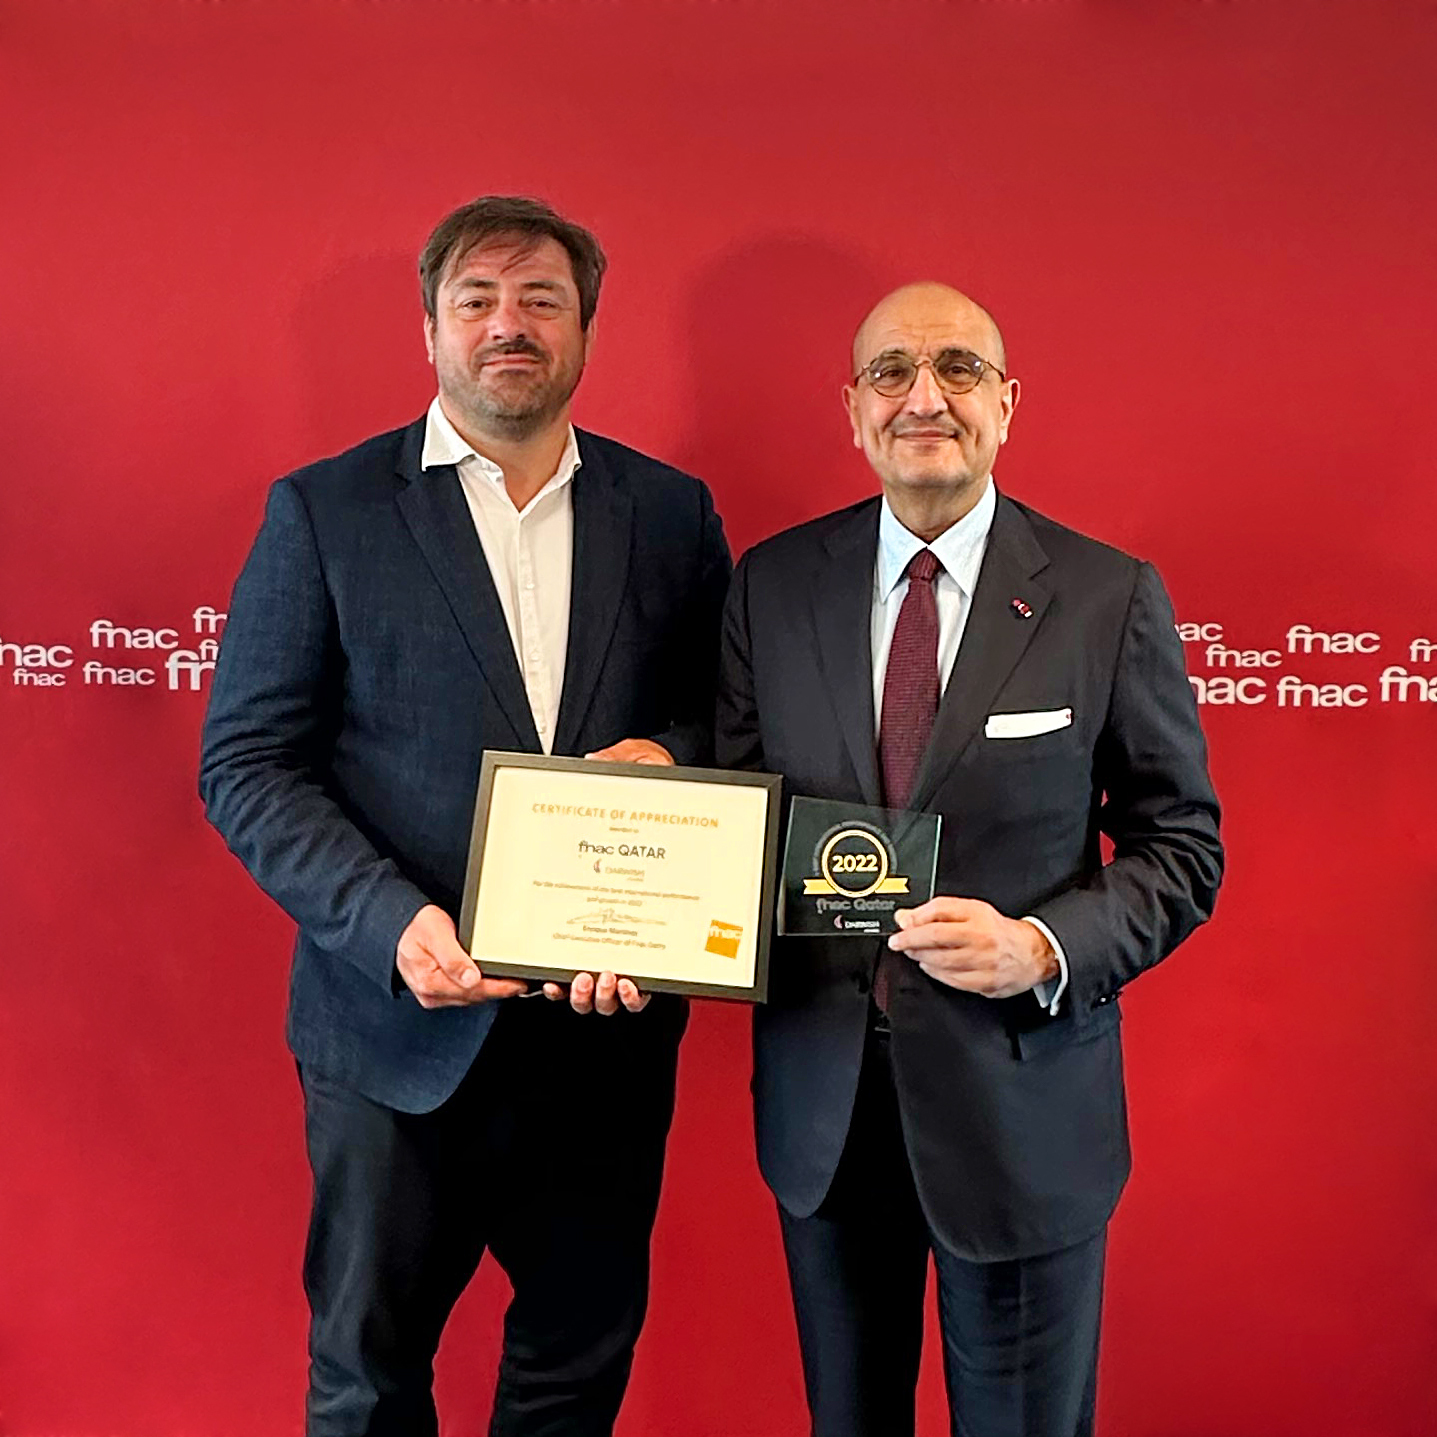 For the second time, Fnac Darty Group recognizes Fnac Qatar for “Best International Performance and Growth”